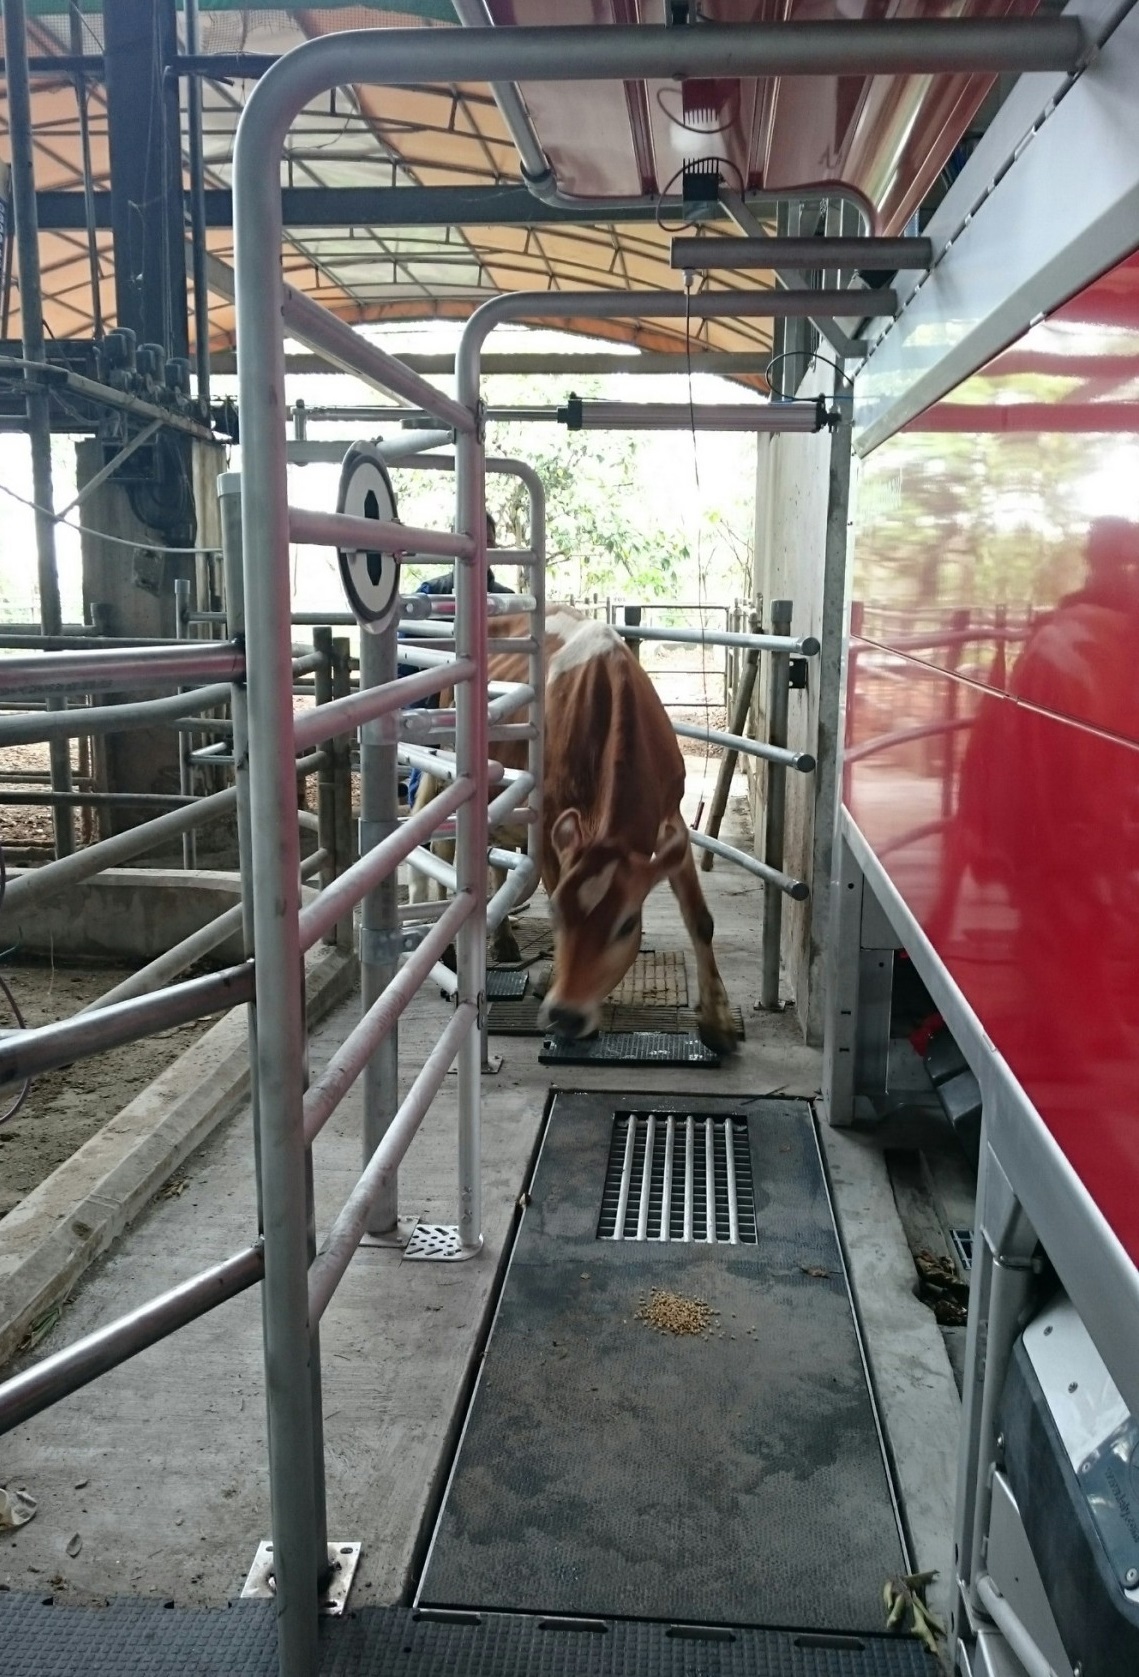 The milking channel has a built-in weighing scale incorporated. The integrated T4C software system constantly monitors the weight of the lactating cows